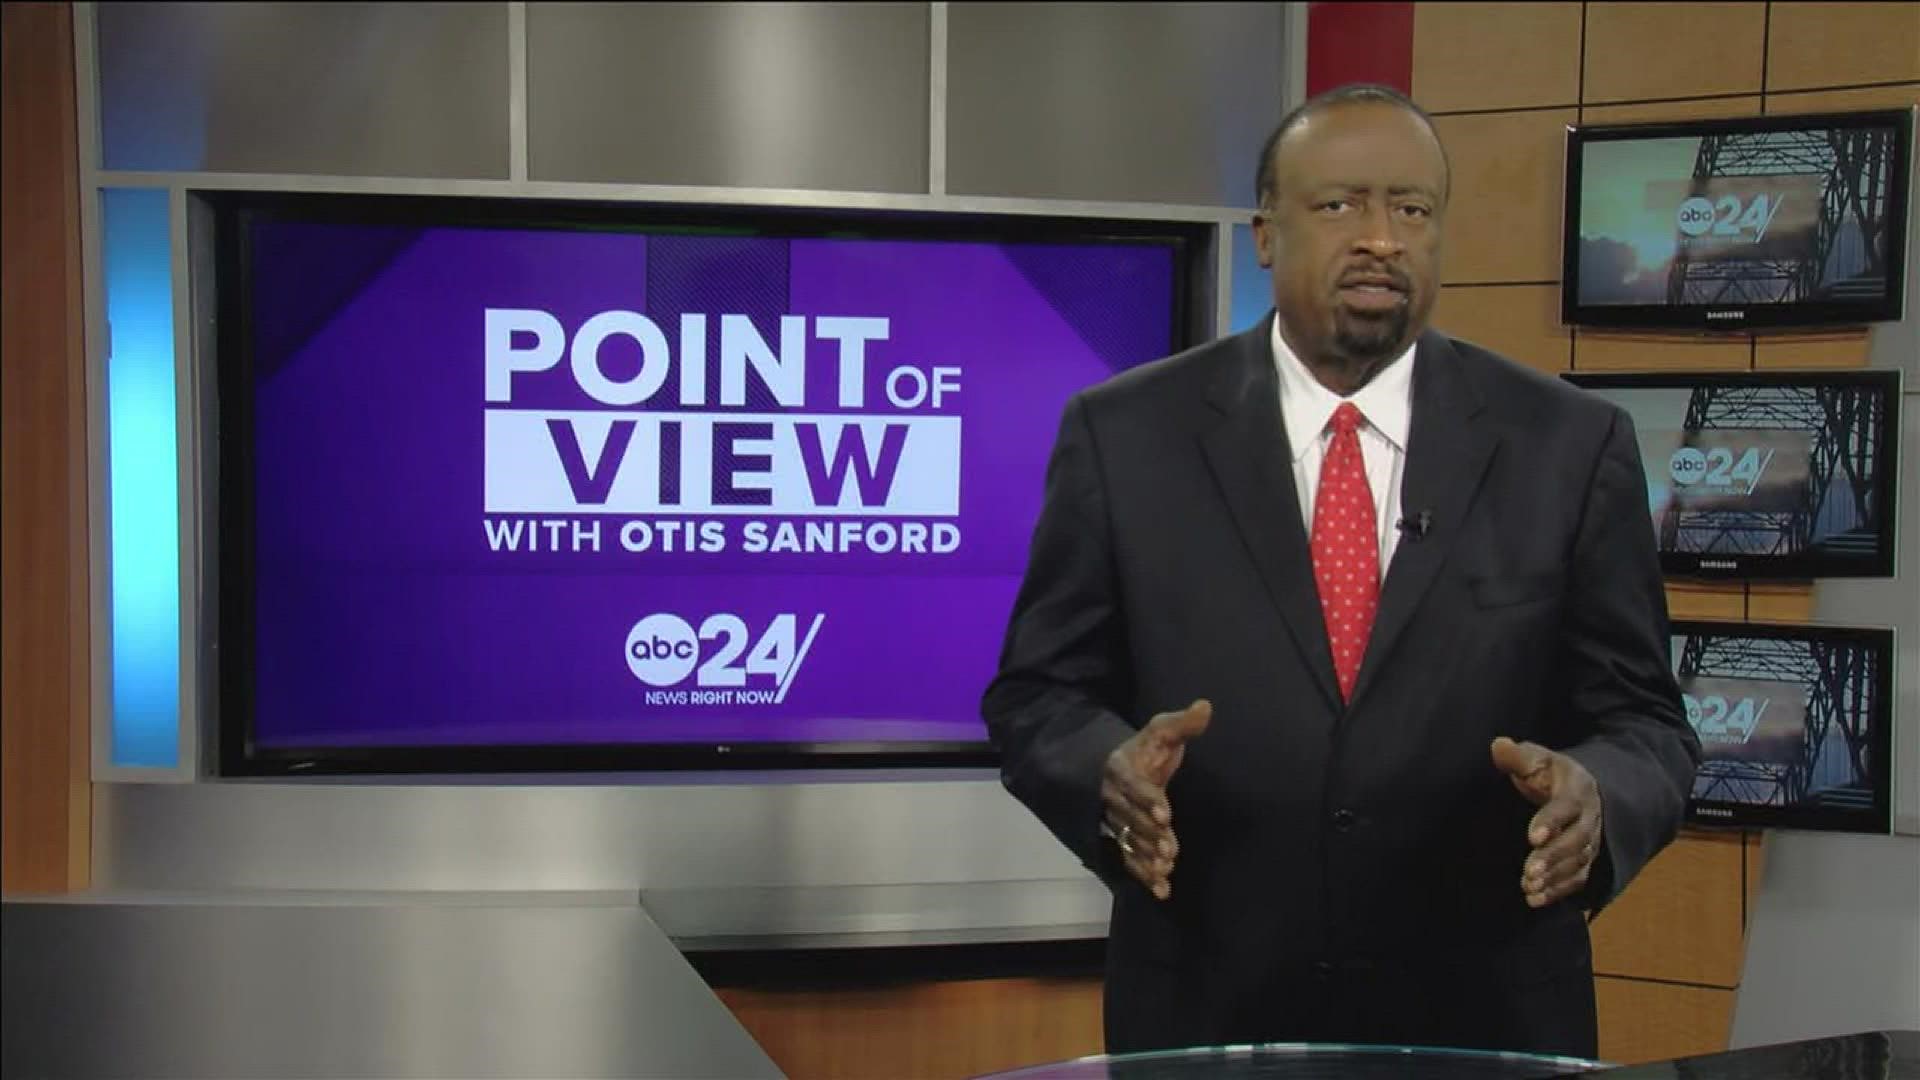 ABC 24 political analyst and commentator Otis Sanford shared his point of view on two big projects slated for the Mid-South region.